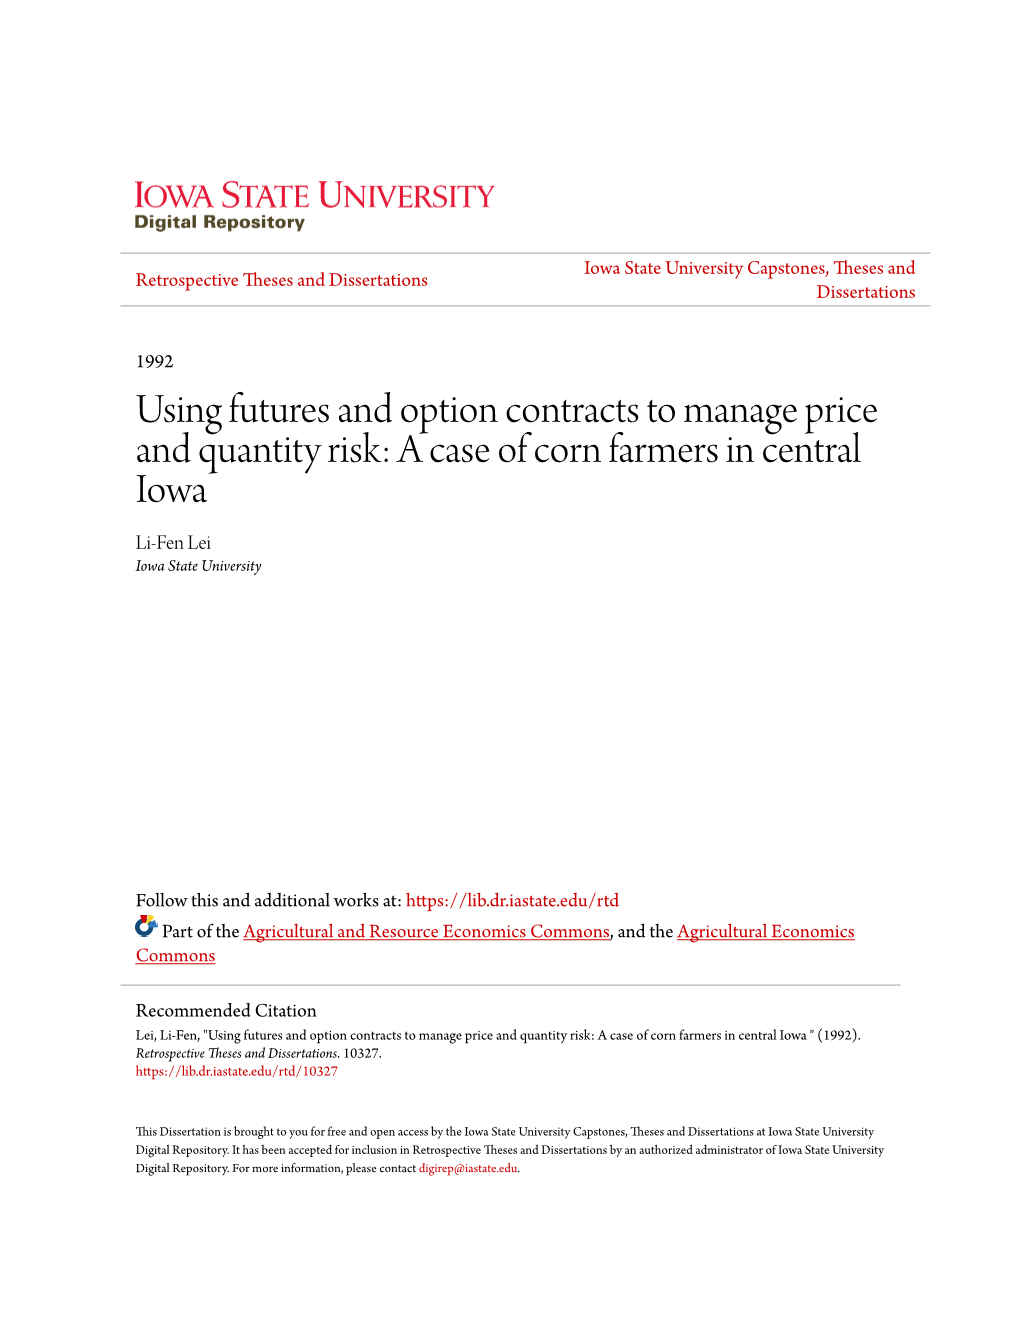 Using Futures and Option Contracts to Manage Price and Quantity Risk: a Case of Corn Farmers in Central Iowa Li-Fen Lei Iowa State University